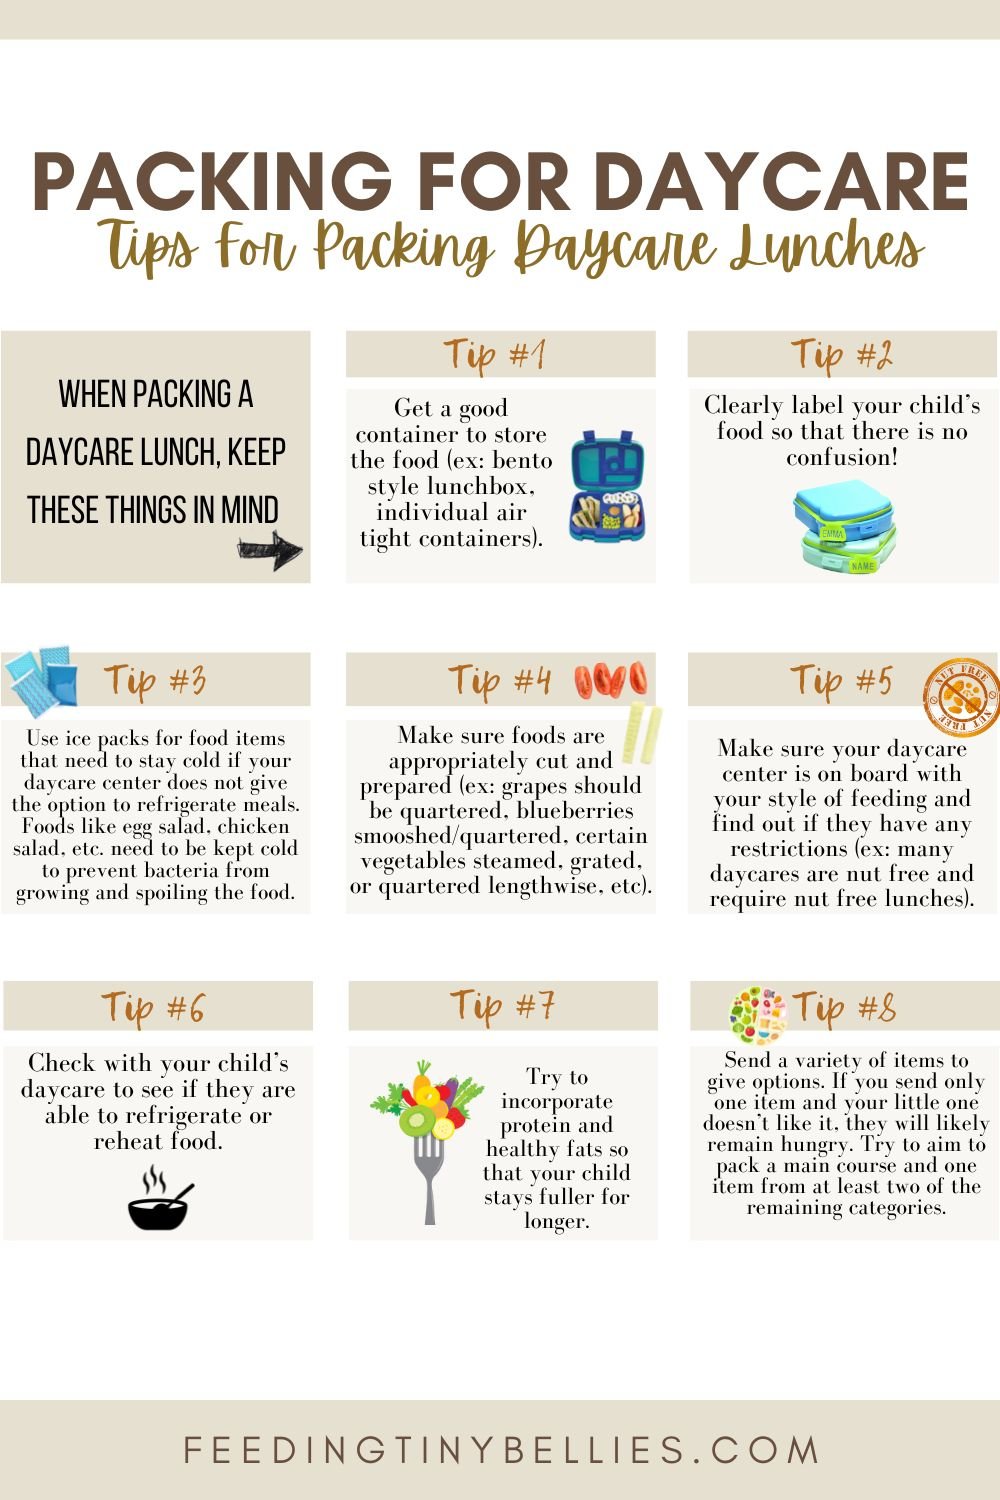 Tips for packing daycare lunches